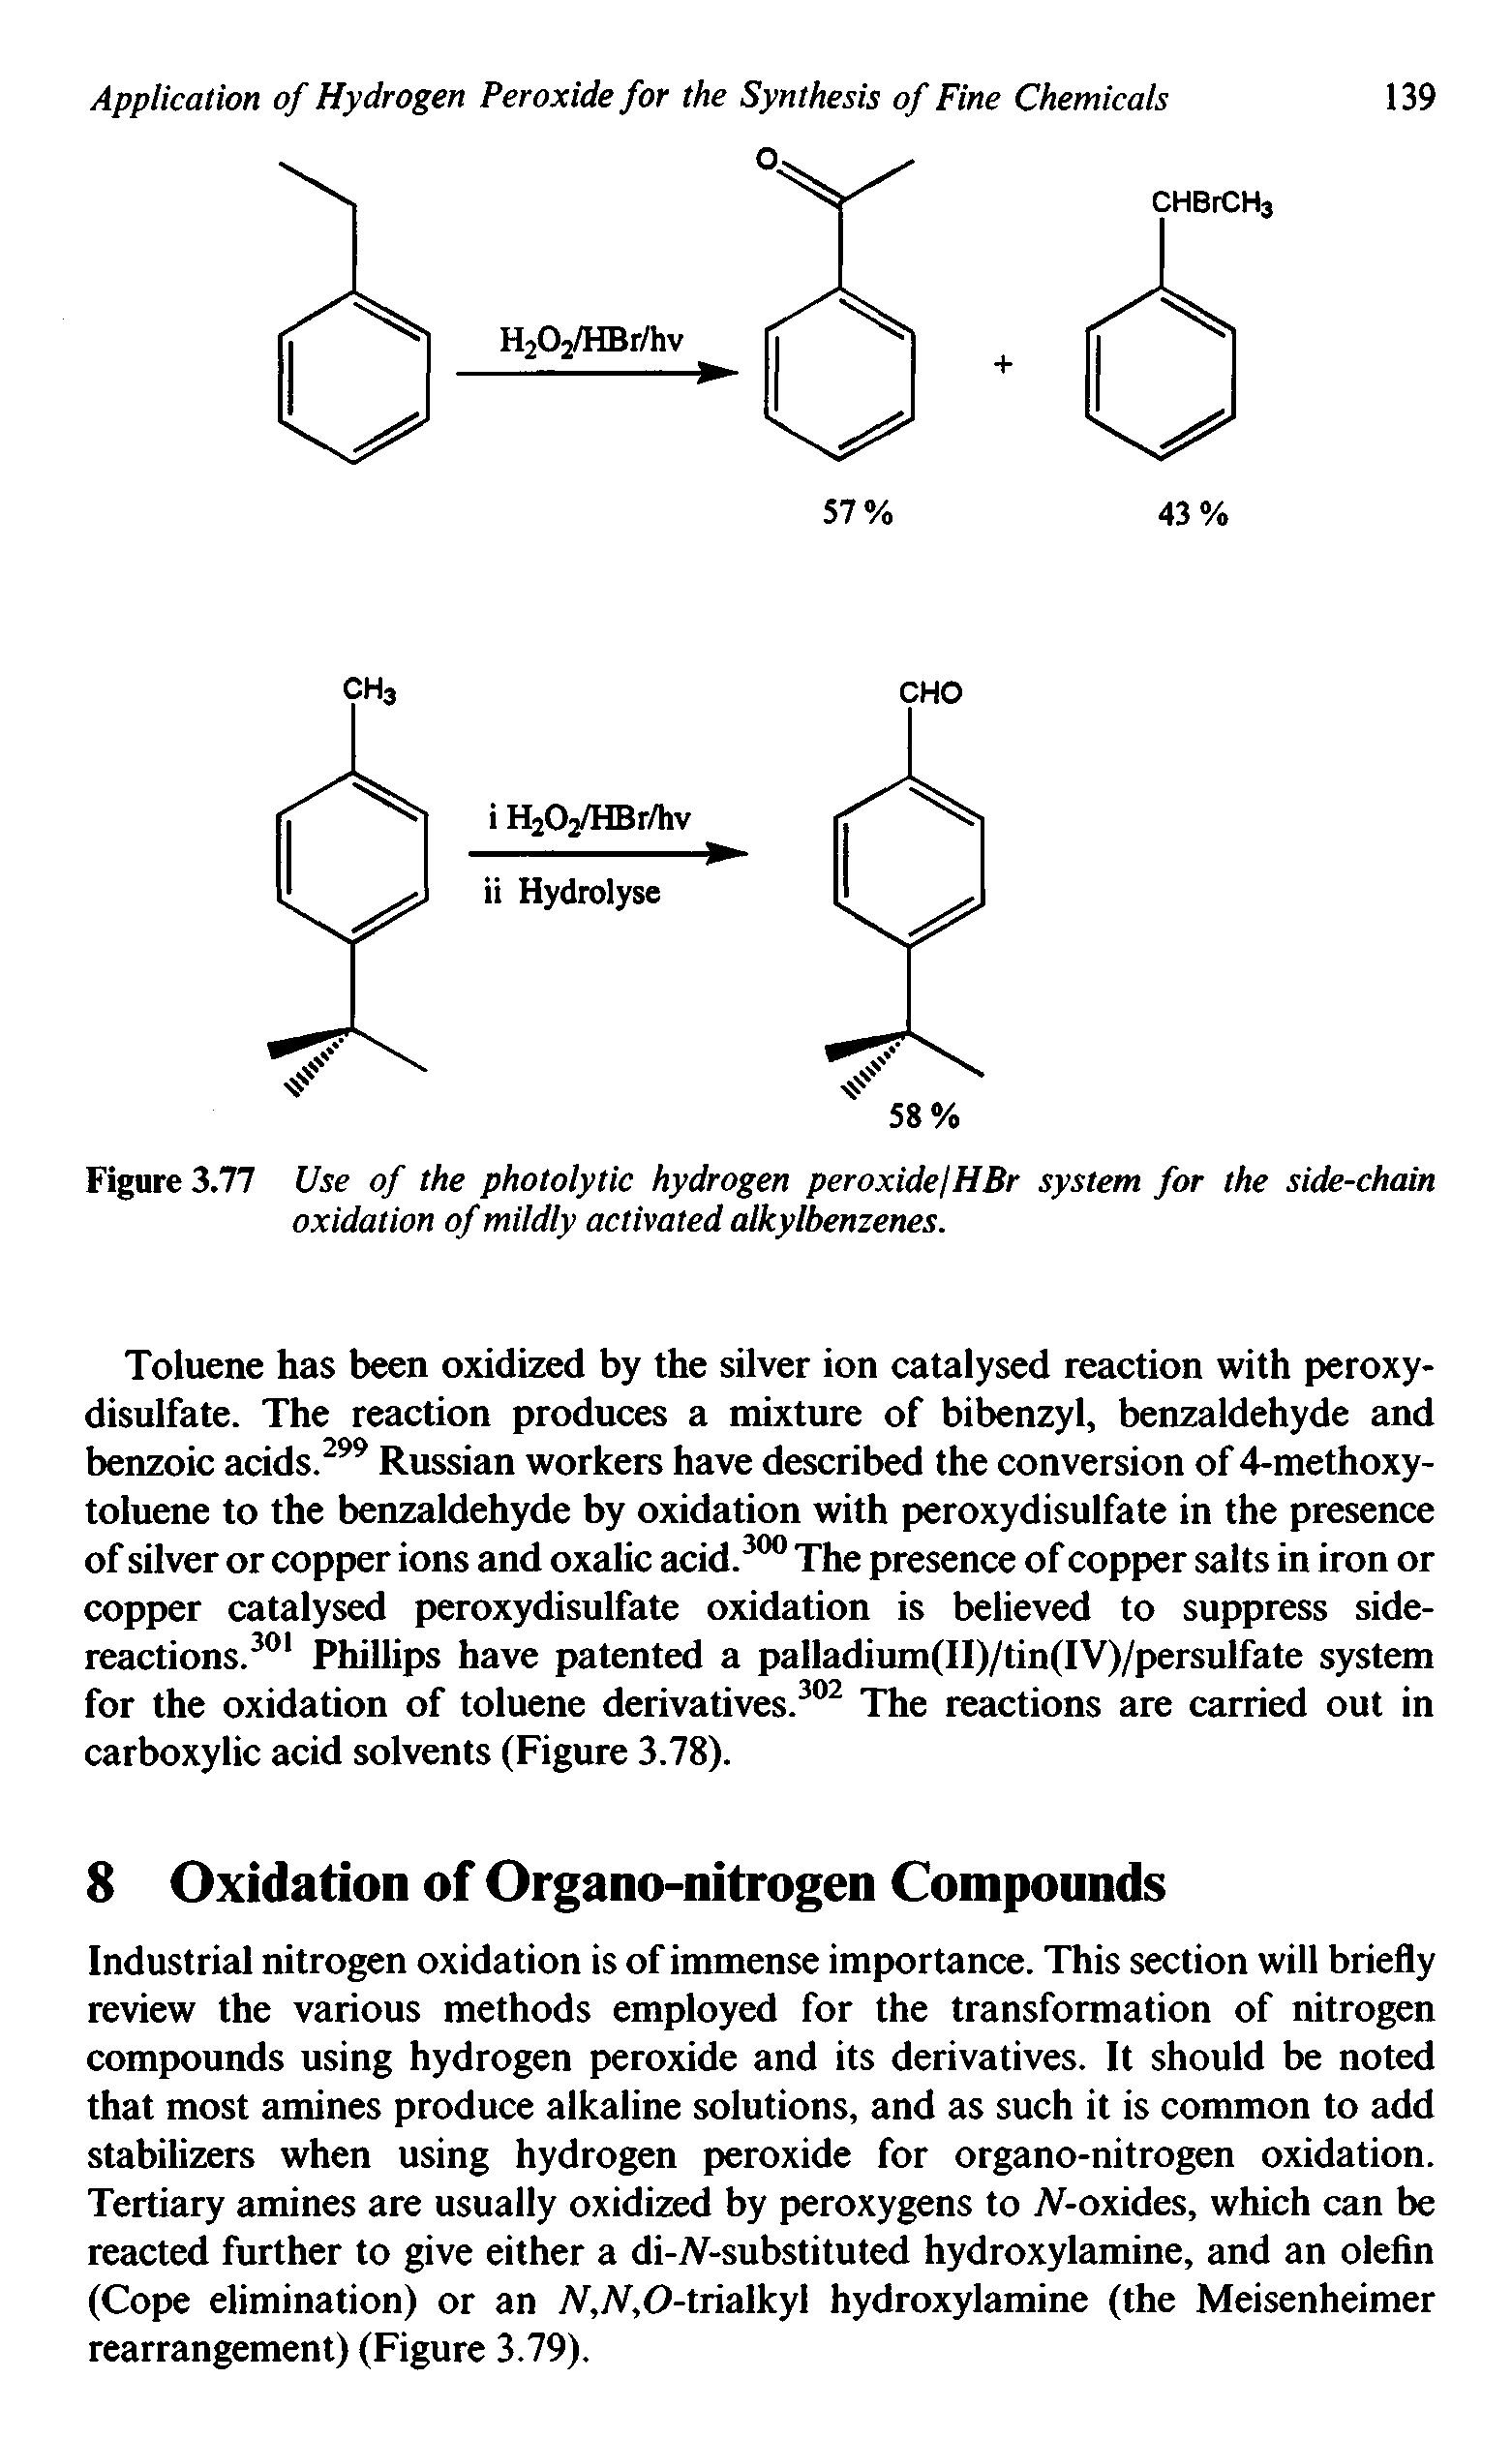 Figure 3.77 Use of the photolytic hydrogen peroxide/HBr system for the side-chain oxidation of mildly activated alky (benzenes.